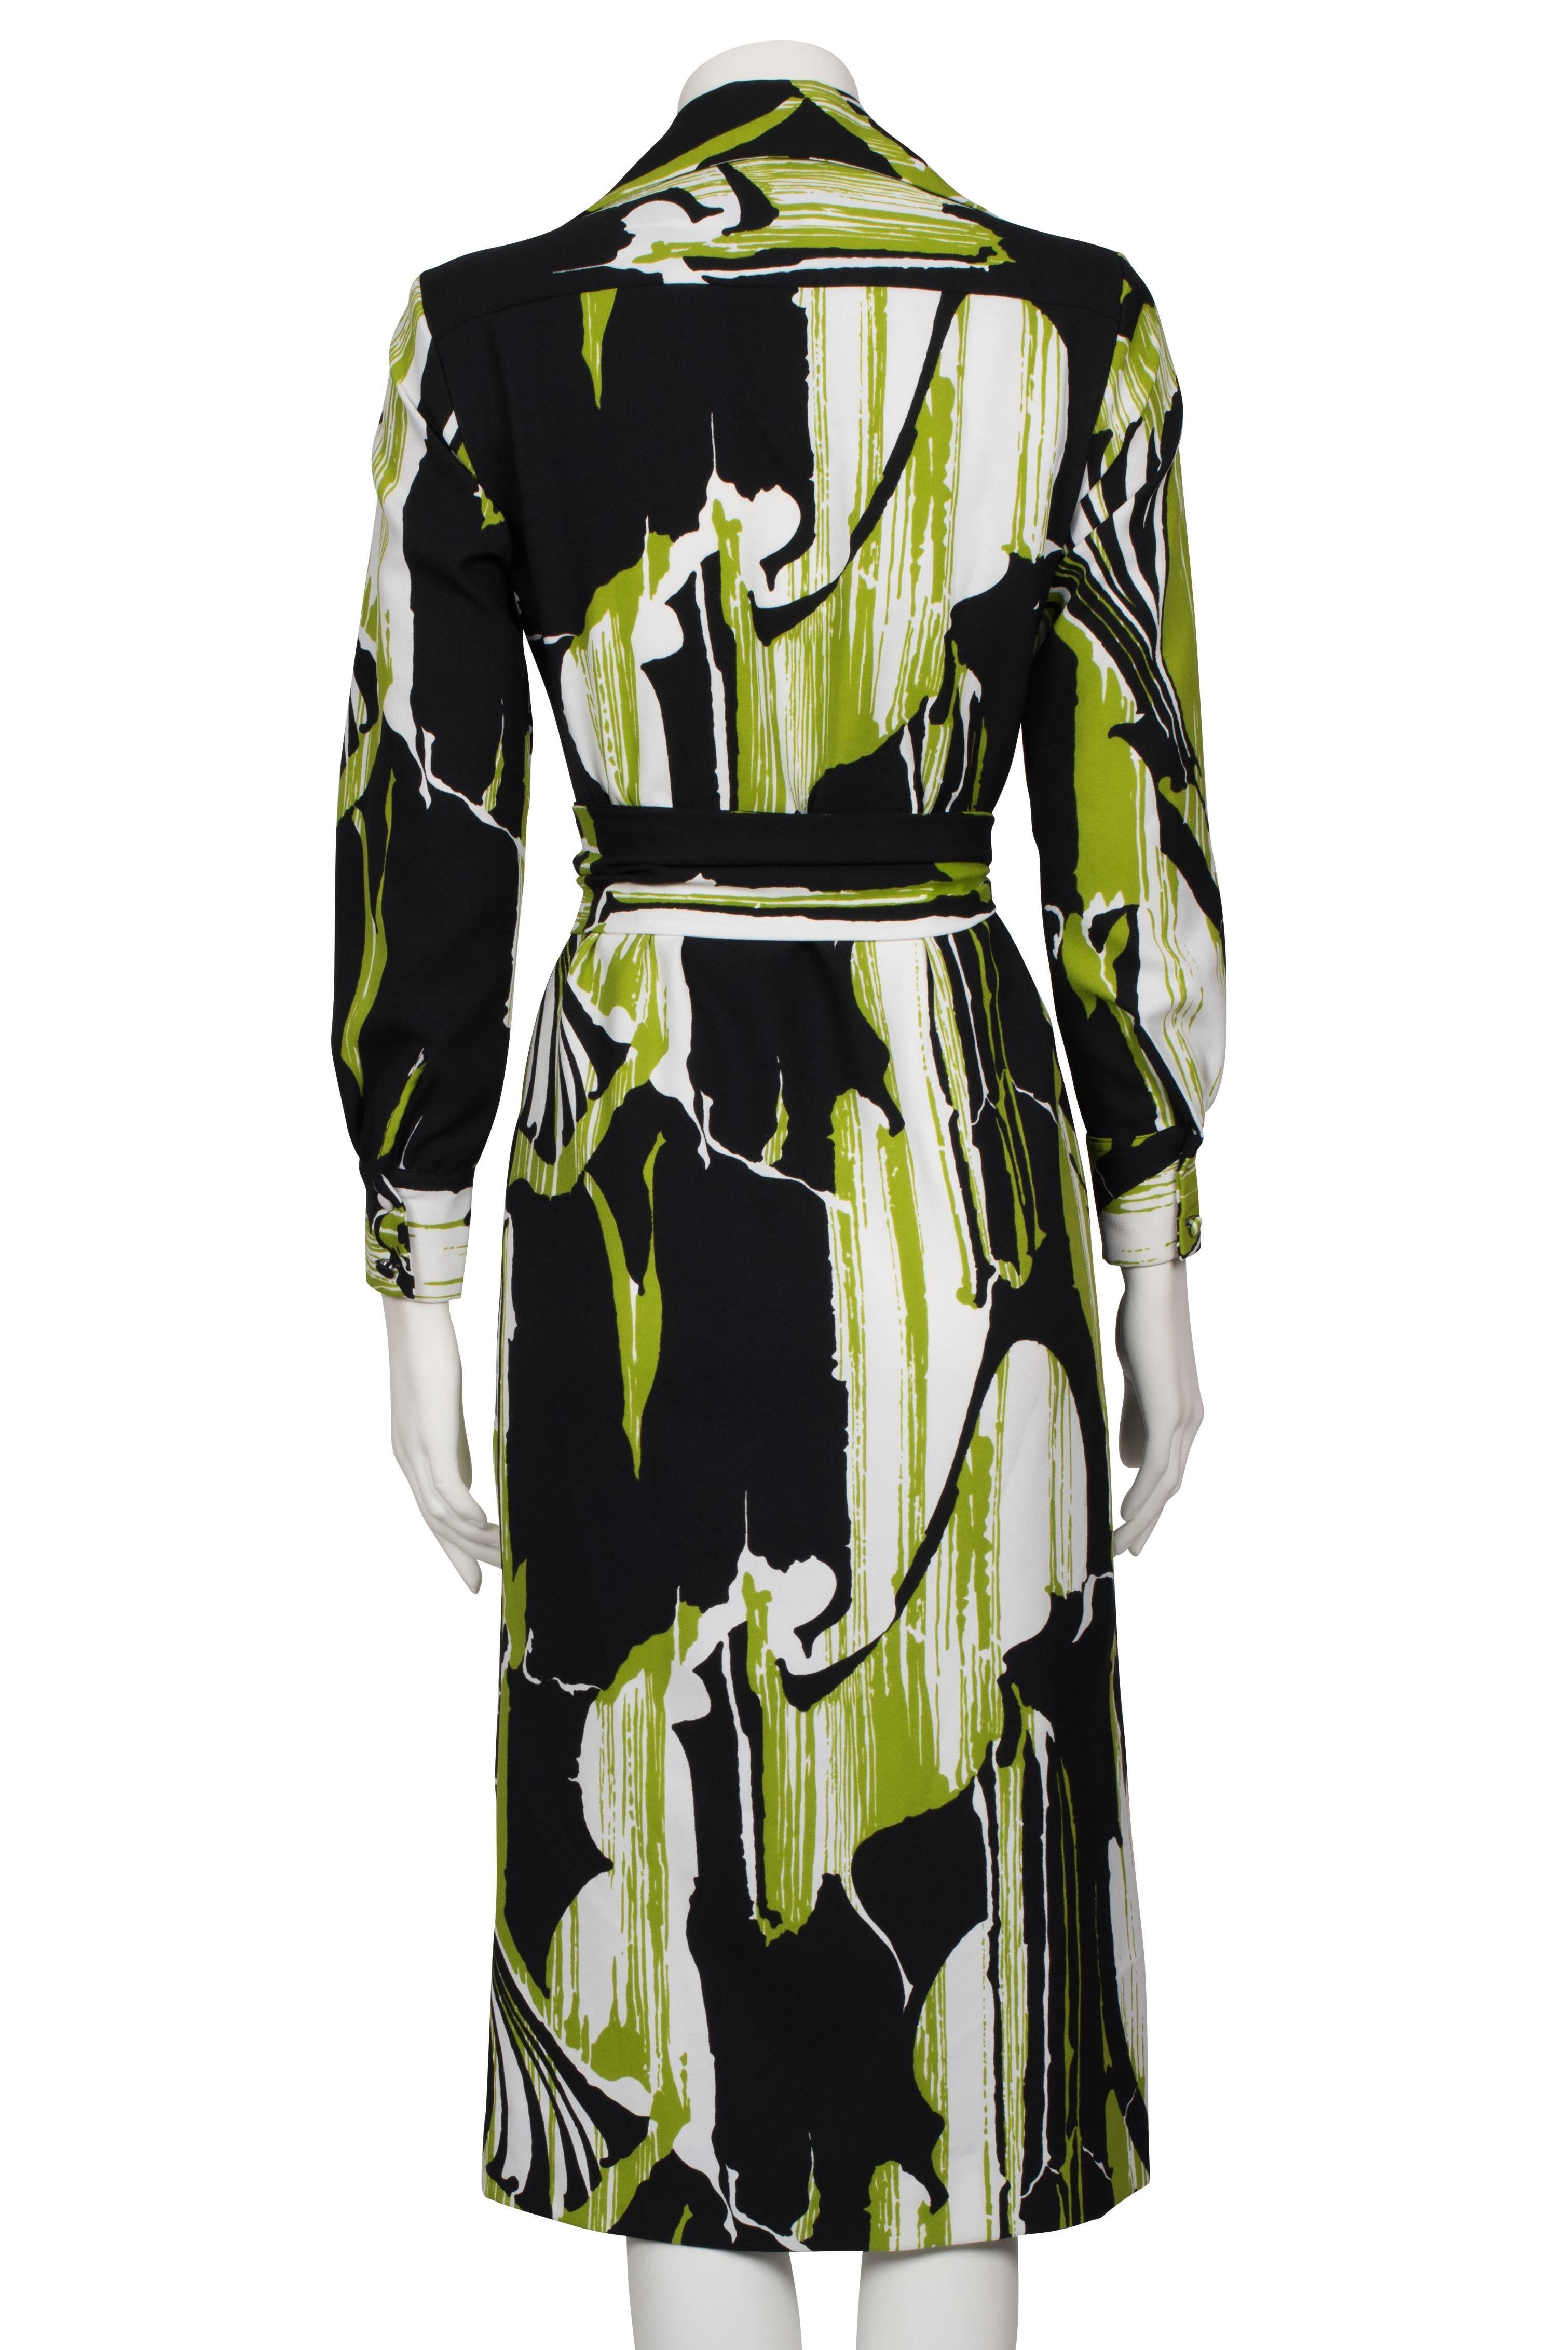 1970s Lime White & Black Abstract Print Lanvin Shirt Dress For Sale 1